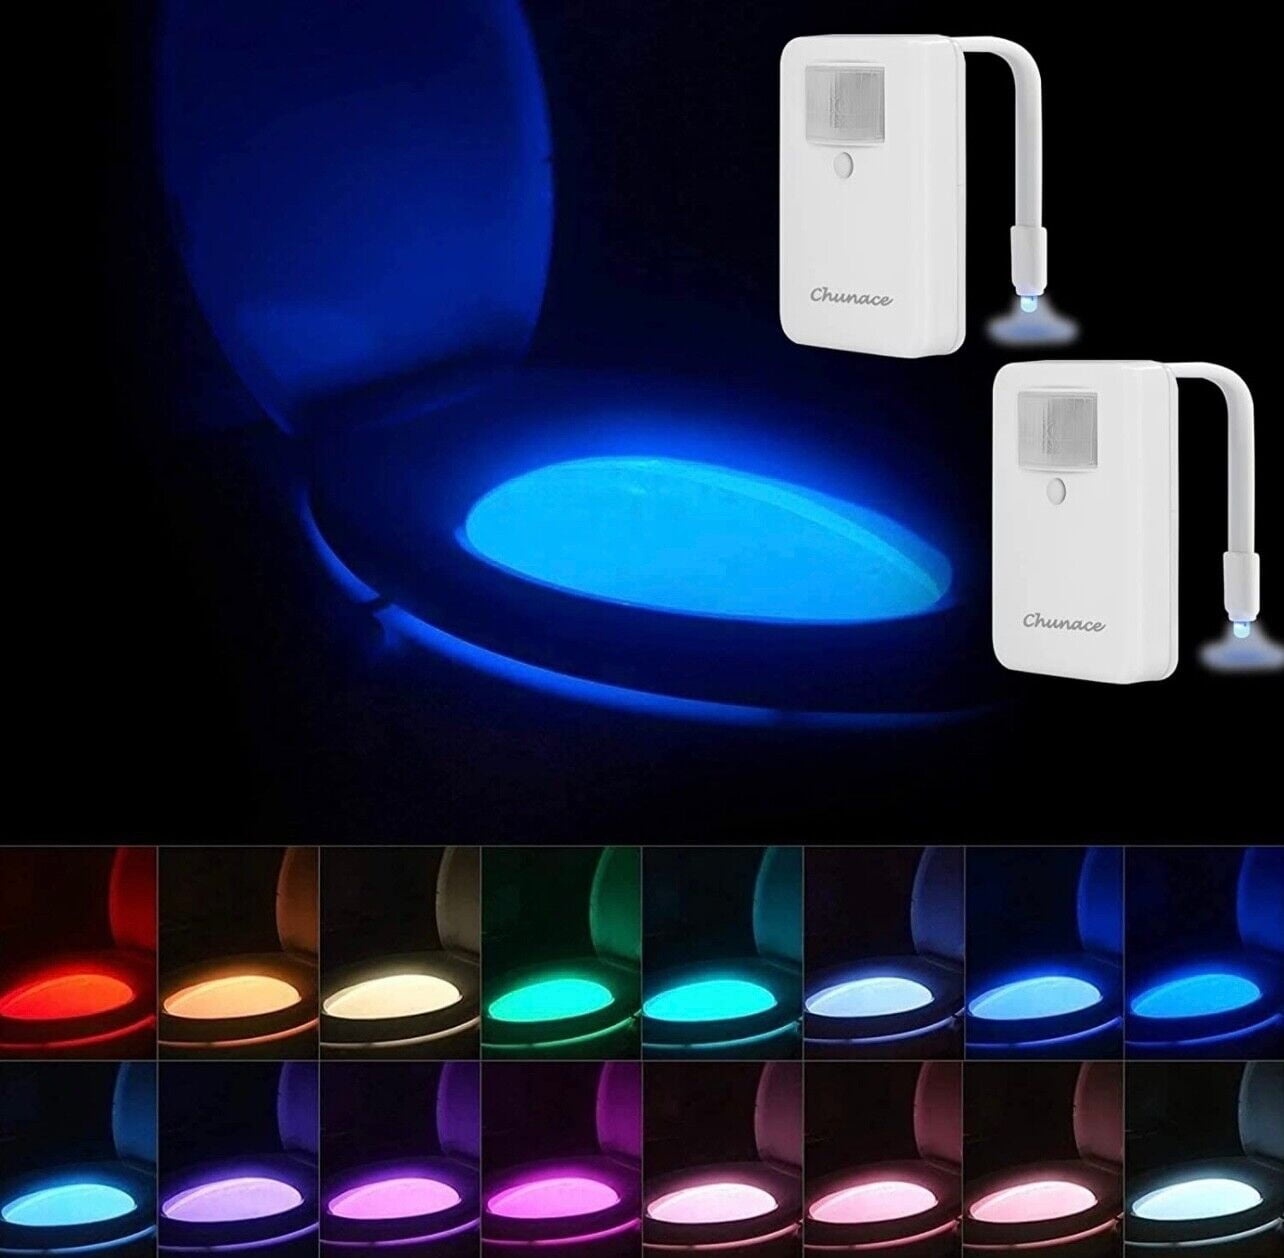 JANDEL 1Pack Toilet Night Light by Ailun Motion Activated LED Light 16  Colors Changing Toilet Bowl Nightlight for Bathroom - Battery Not Included  